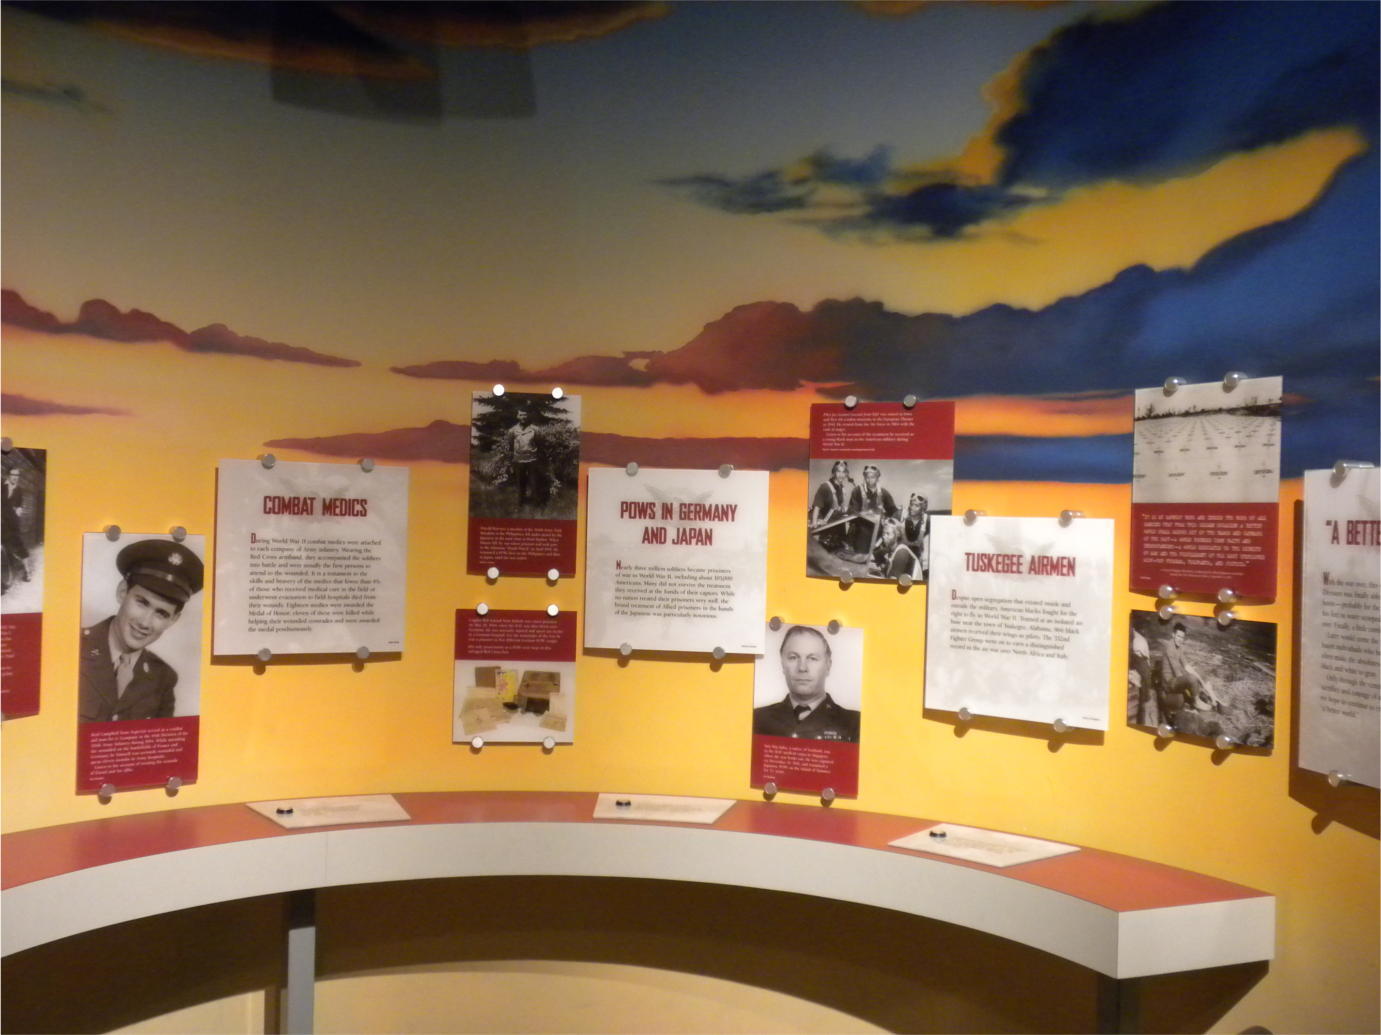 The center's permanent exhibitions focus on the United States's military engagements during and after World War II. Image courtesy of the Richard I. Bong Veterans Historical Center.